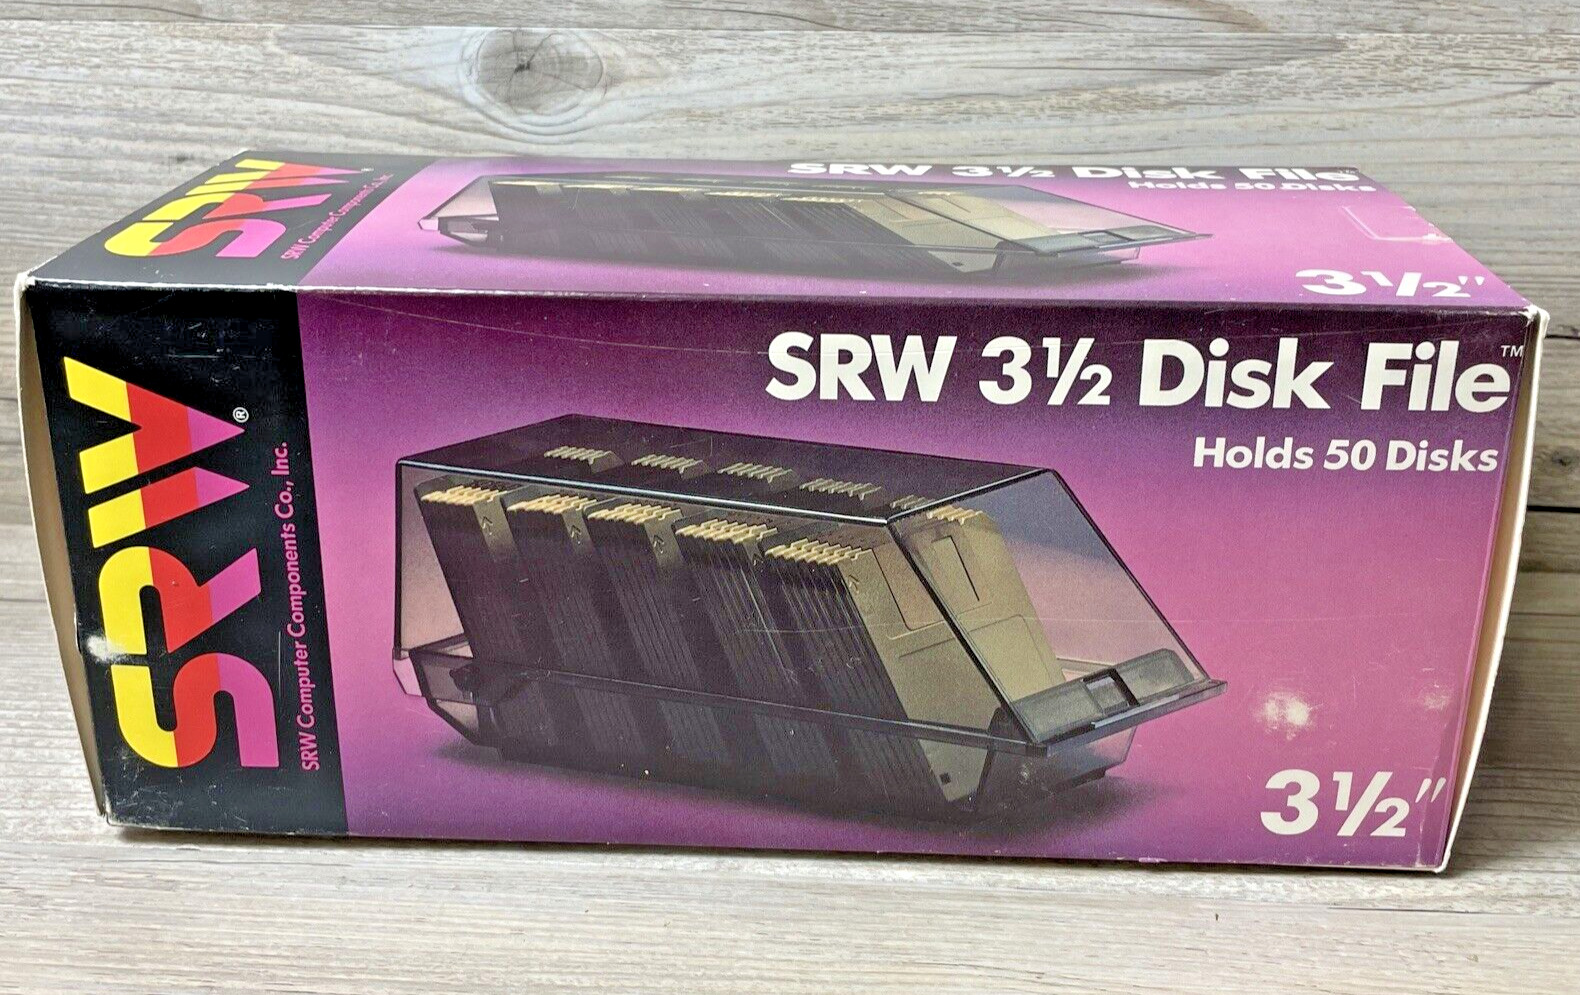 SRW Floppy Disk File Holds Up To 50 Diskettes New Vintage OPEN BOX